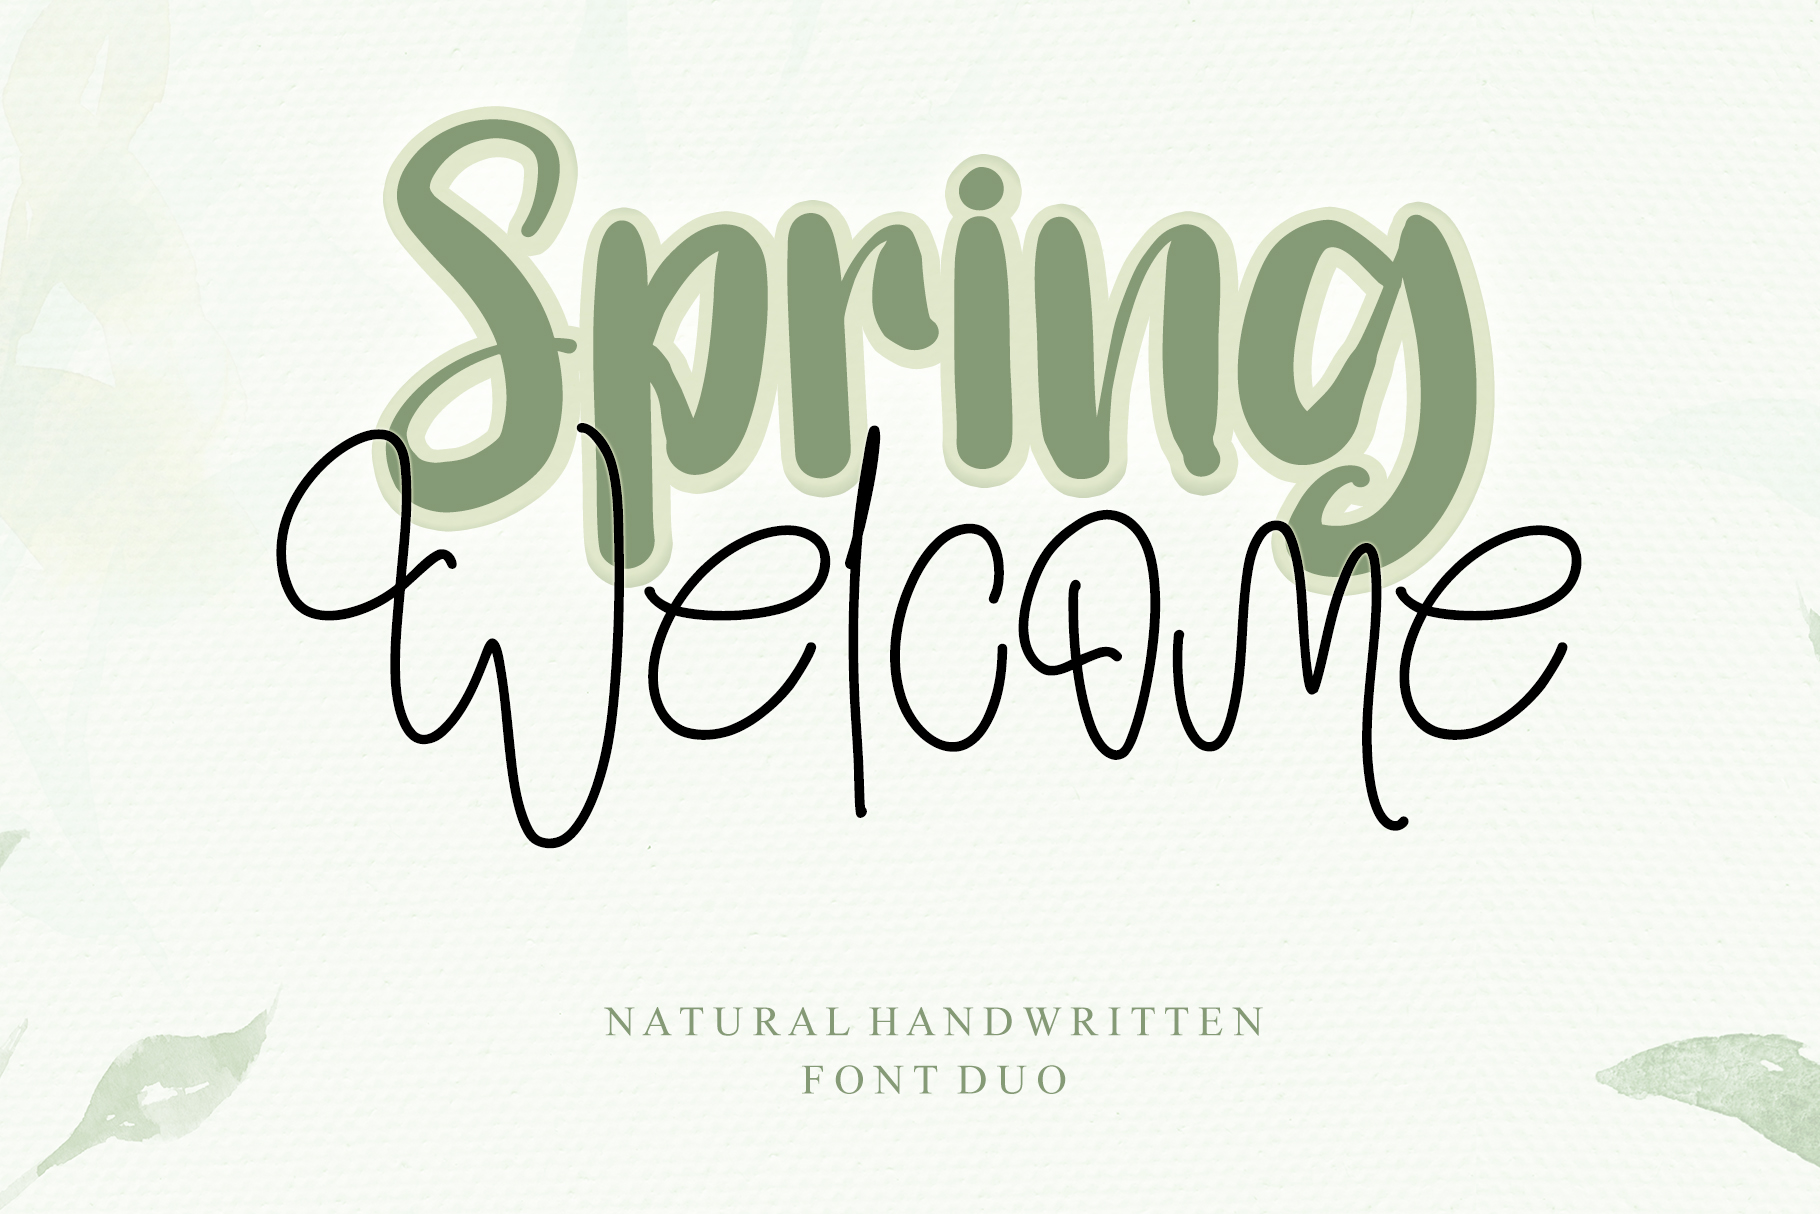 Spring Welcome